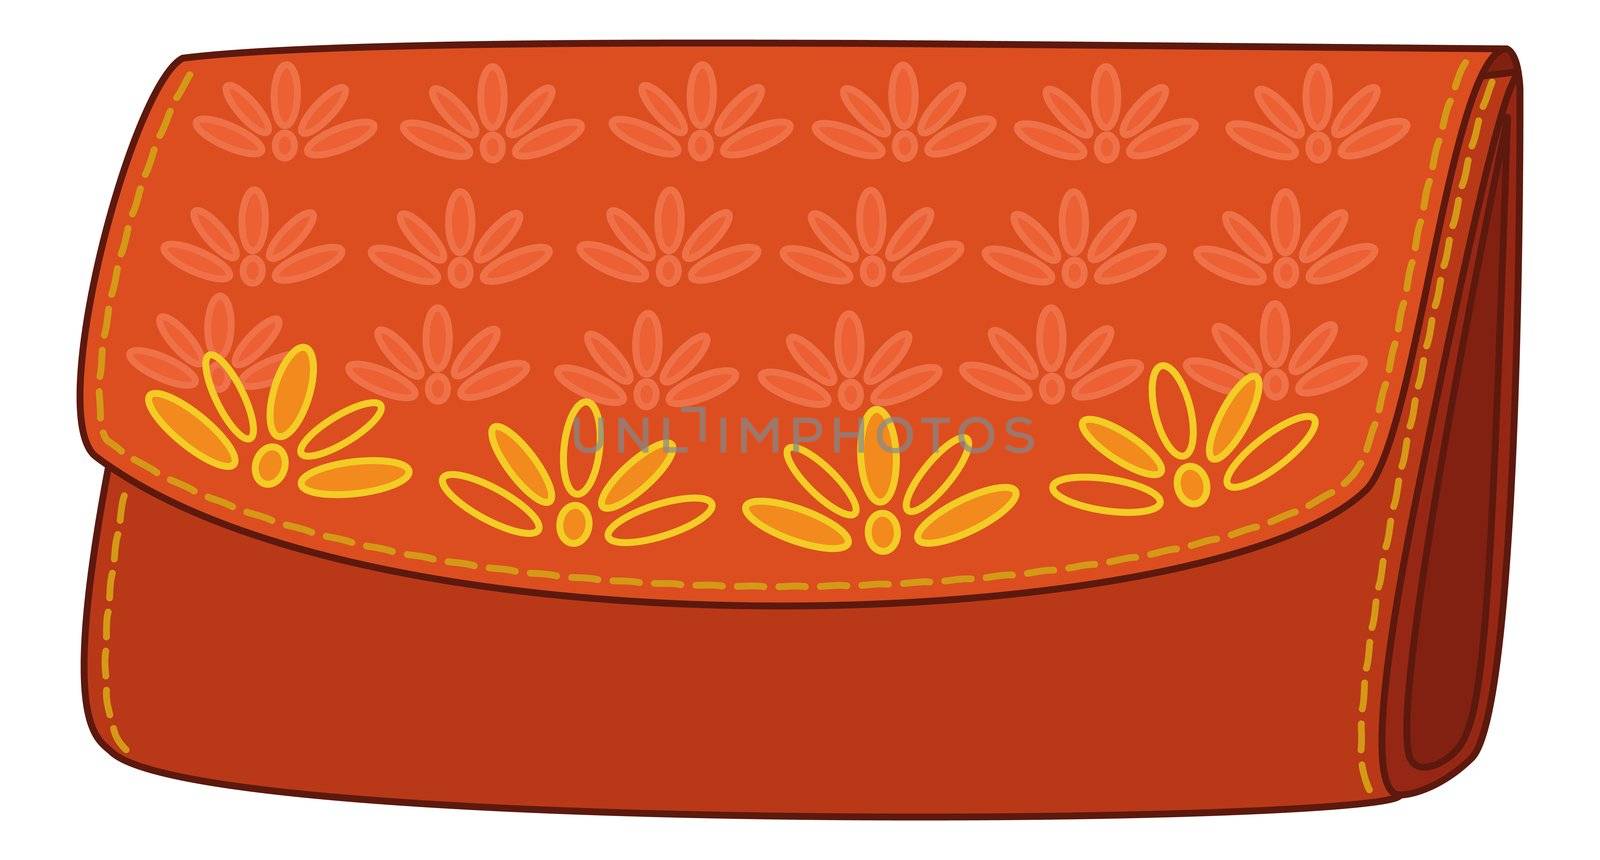 Wallet with a floral pattern by alexcoolok